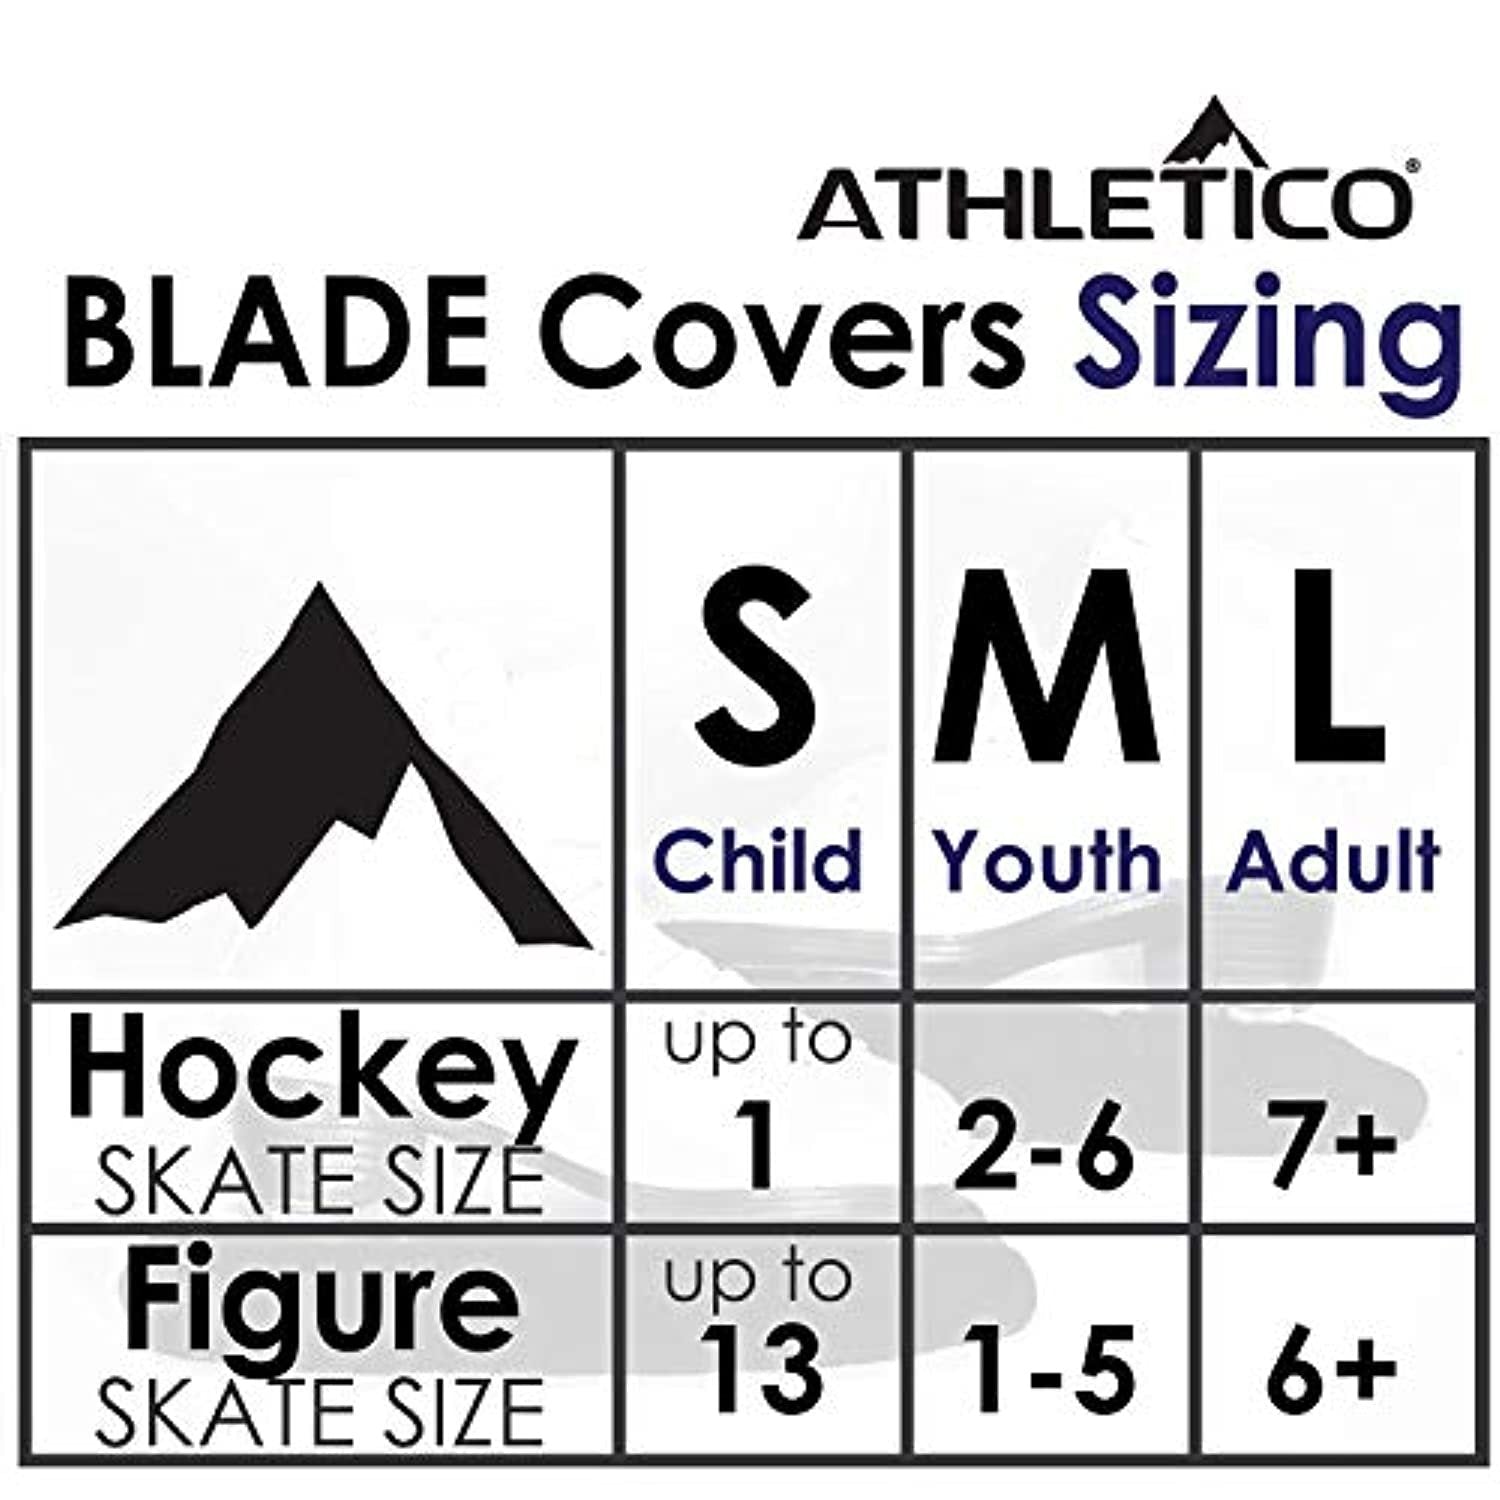 Athletico Ice Skate Blade Covers - Guards for Hockey, Figure, and Ice Skates - Small Black Soakers for Men, Women, Kids